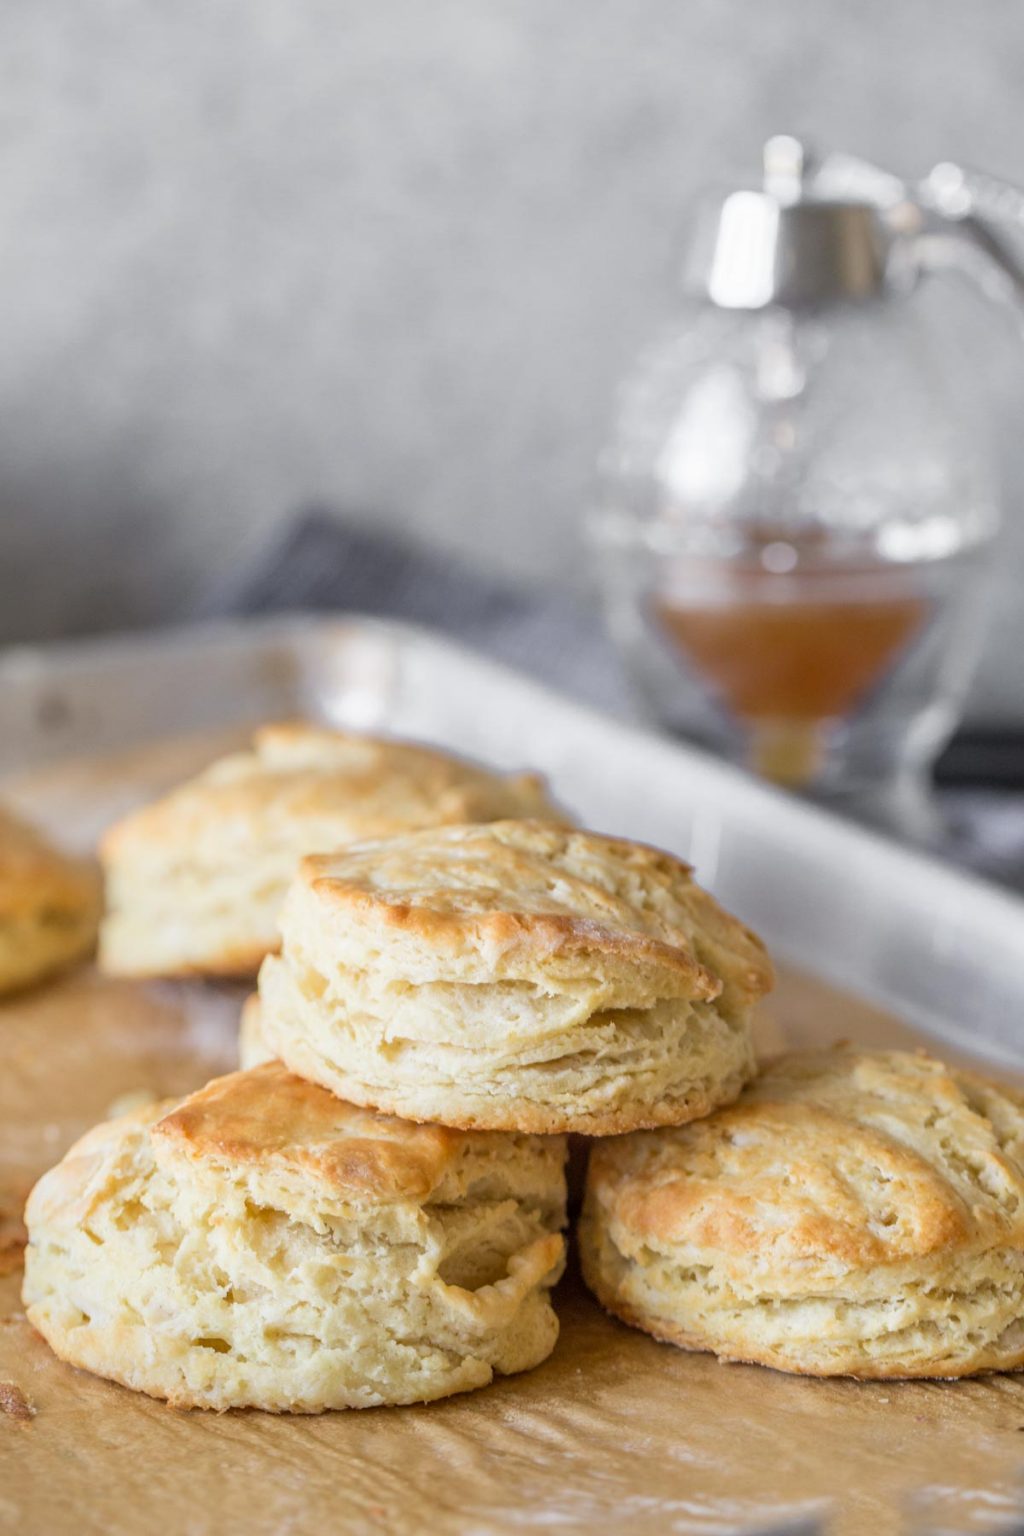 Easy Homemade Biscuits - Lovely Little Kitchen